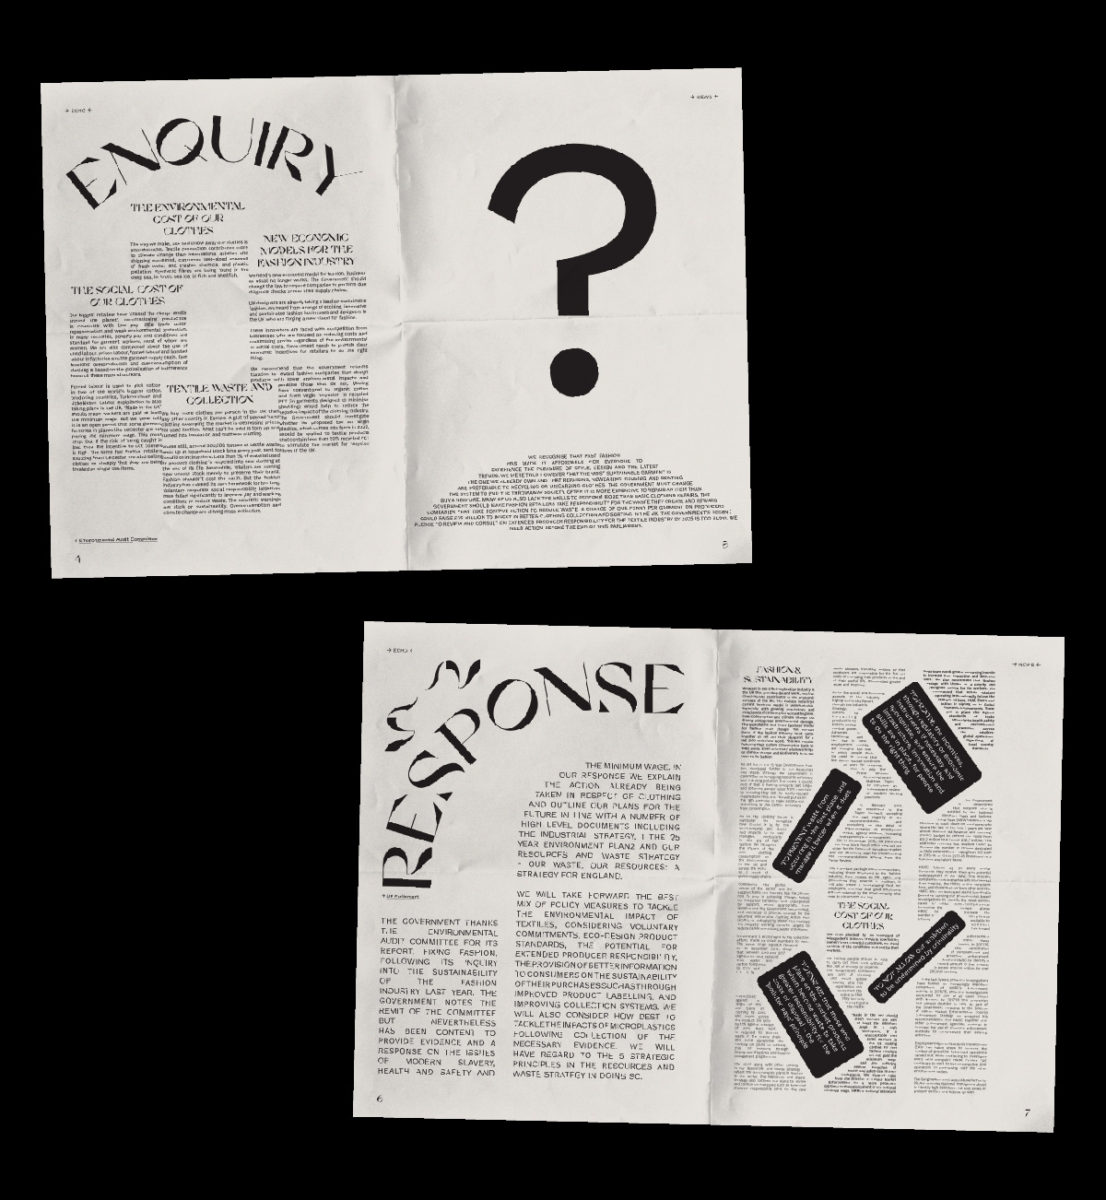 Newspaper spreads from ECHO Paper, "Enquiry" & "Response" 